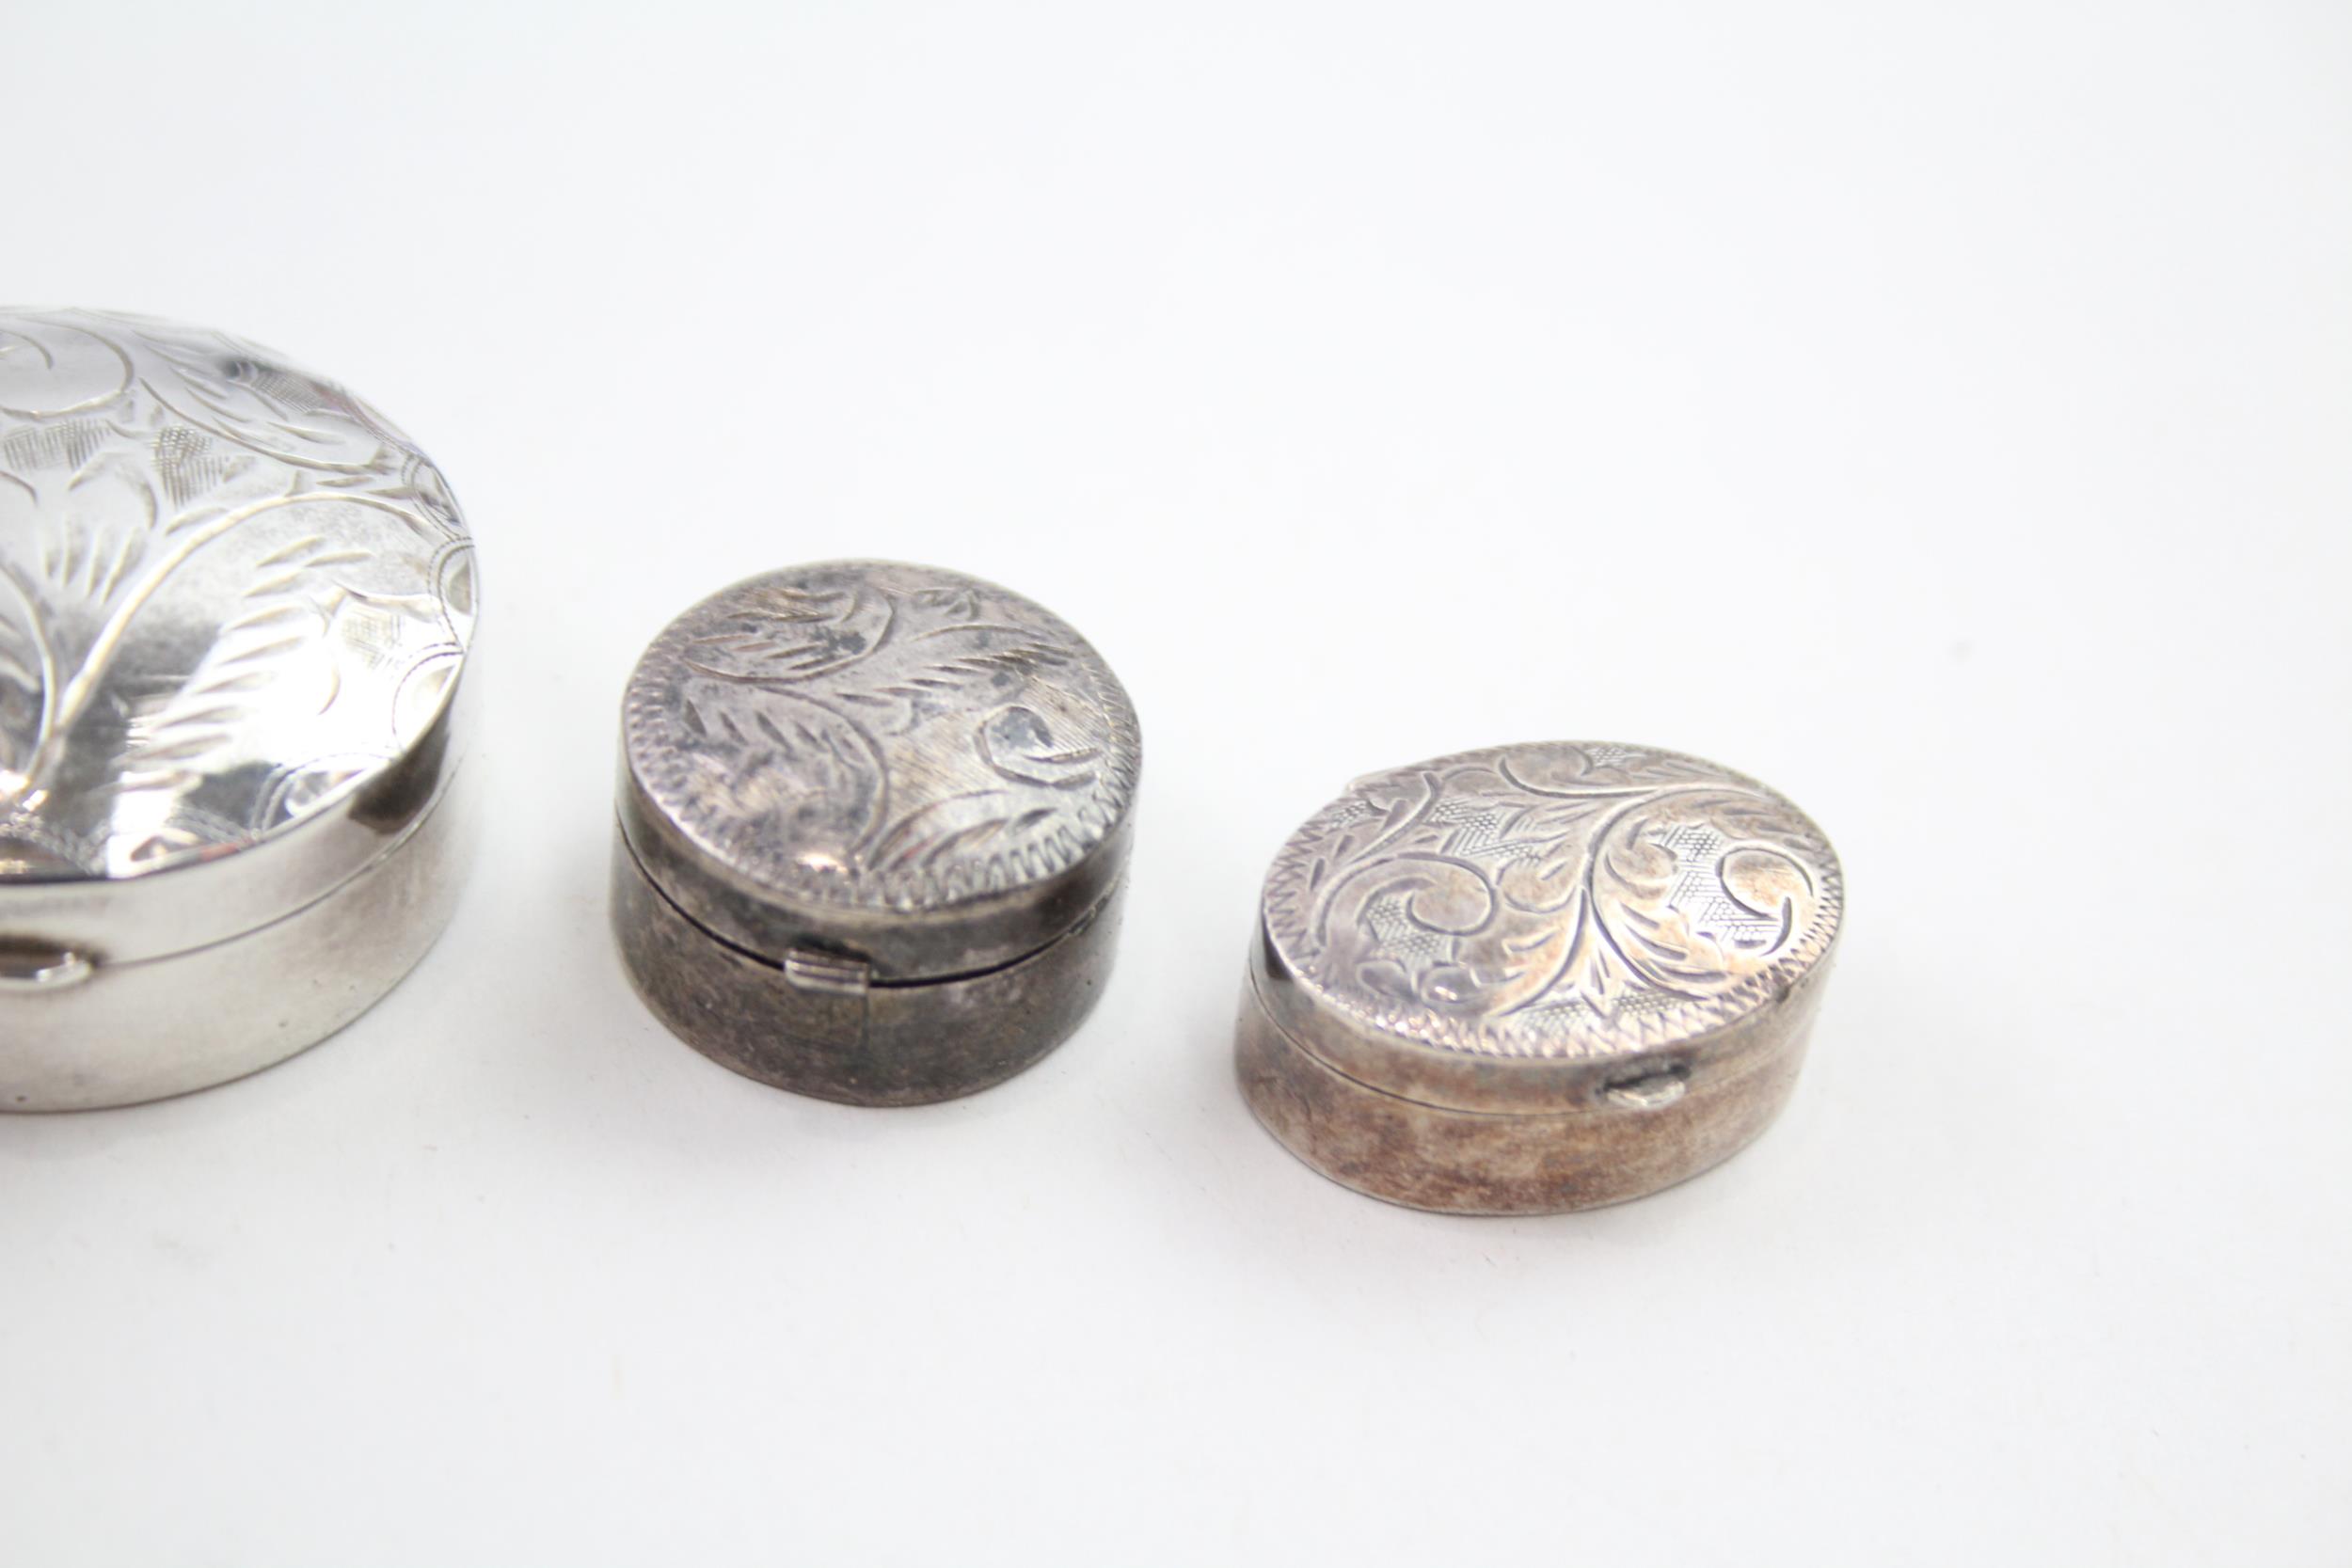 4 x Antique / Vintage Hallmarked .925 STERLING SILVER Pill / Trinket Boxes (59g) - In antique / - Image 4 of 4